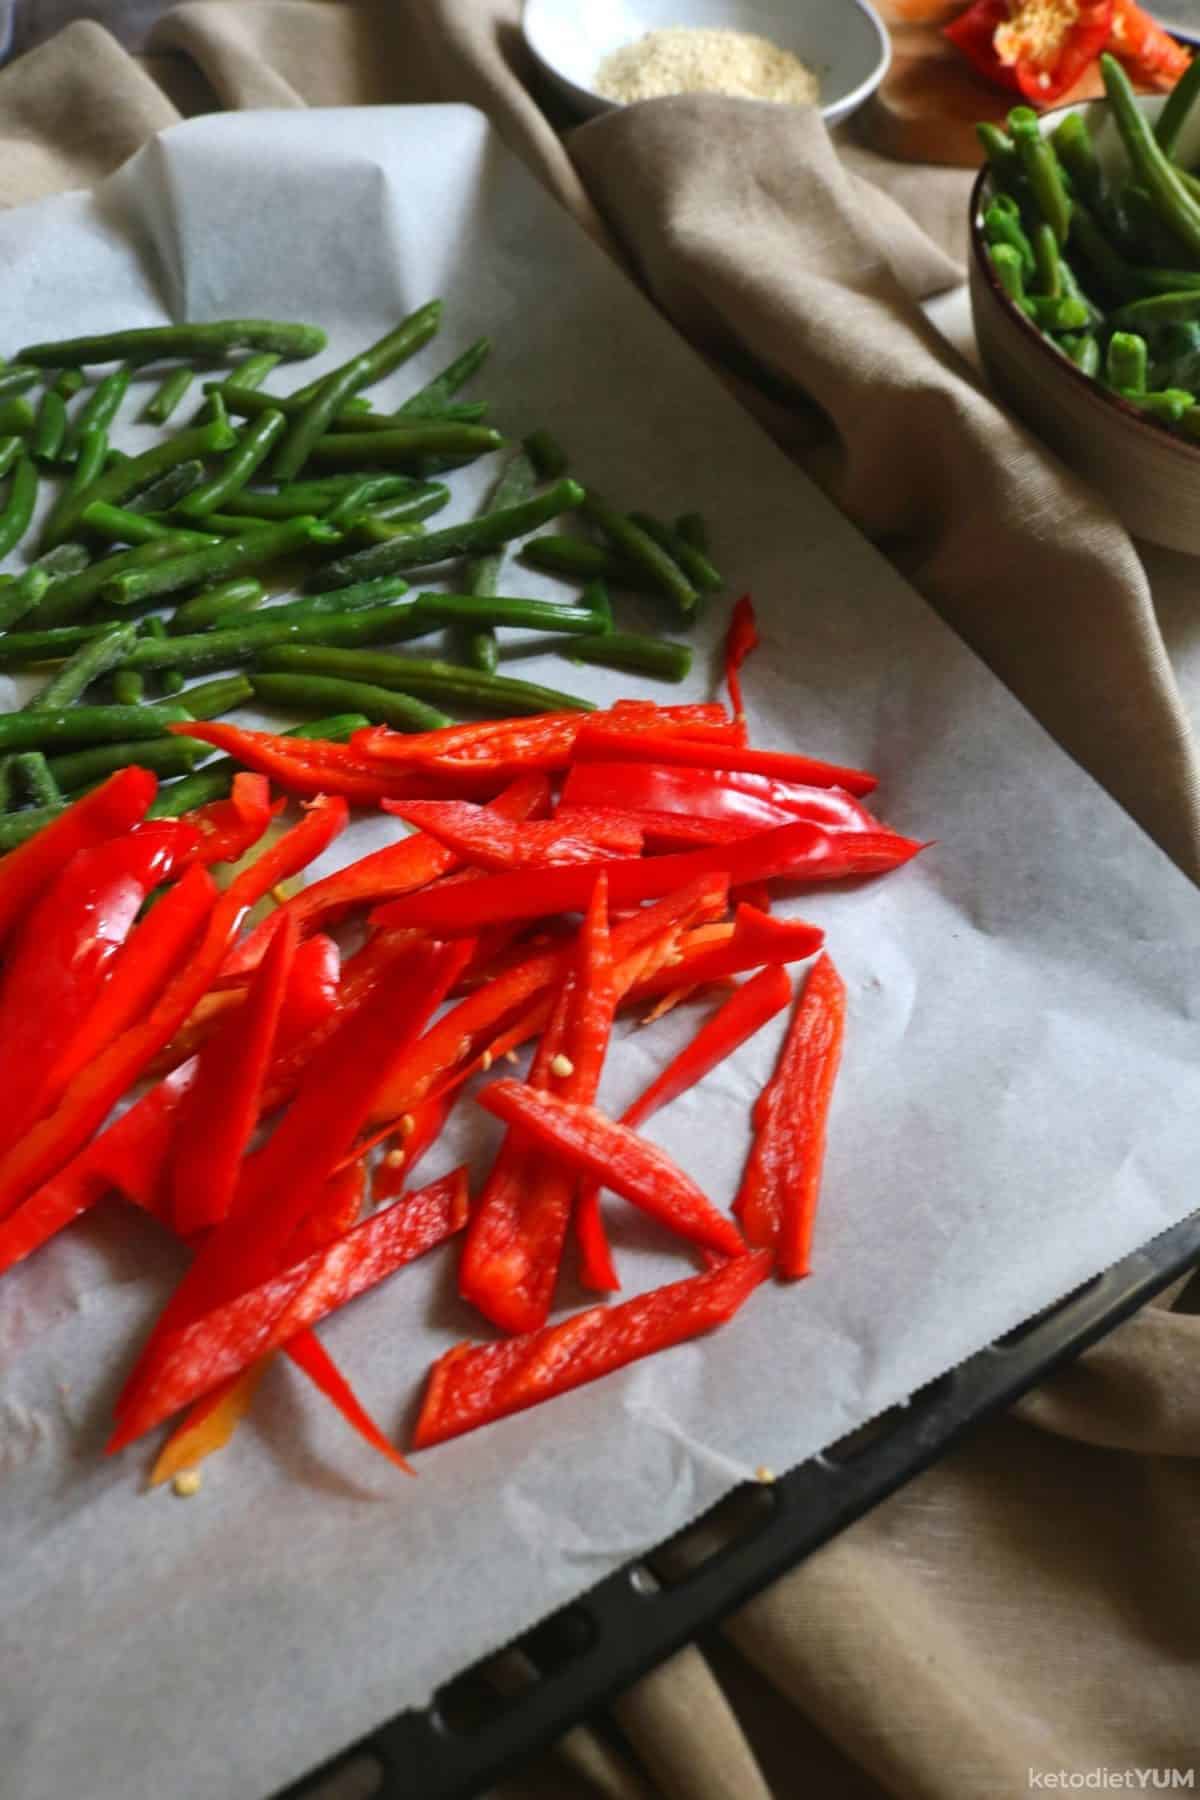 Placing the sliced red pepper and green beans on the baking tray ready to bake